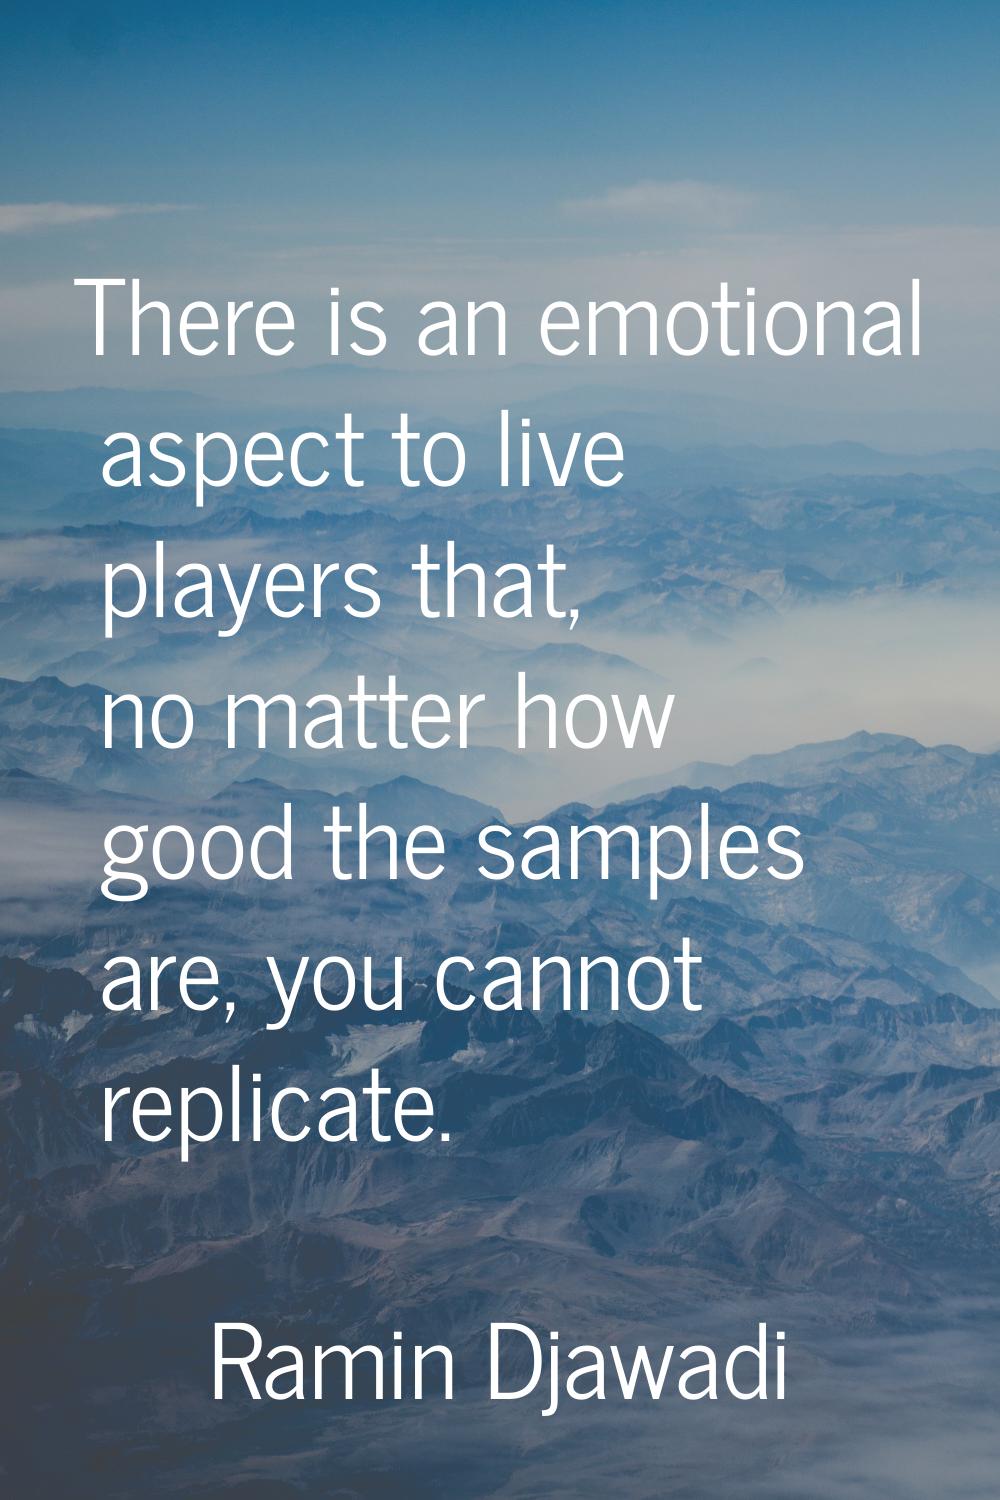 There is an emotional aspect to live players that, no matter how good the samples are, you cannot r